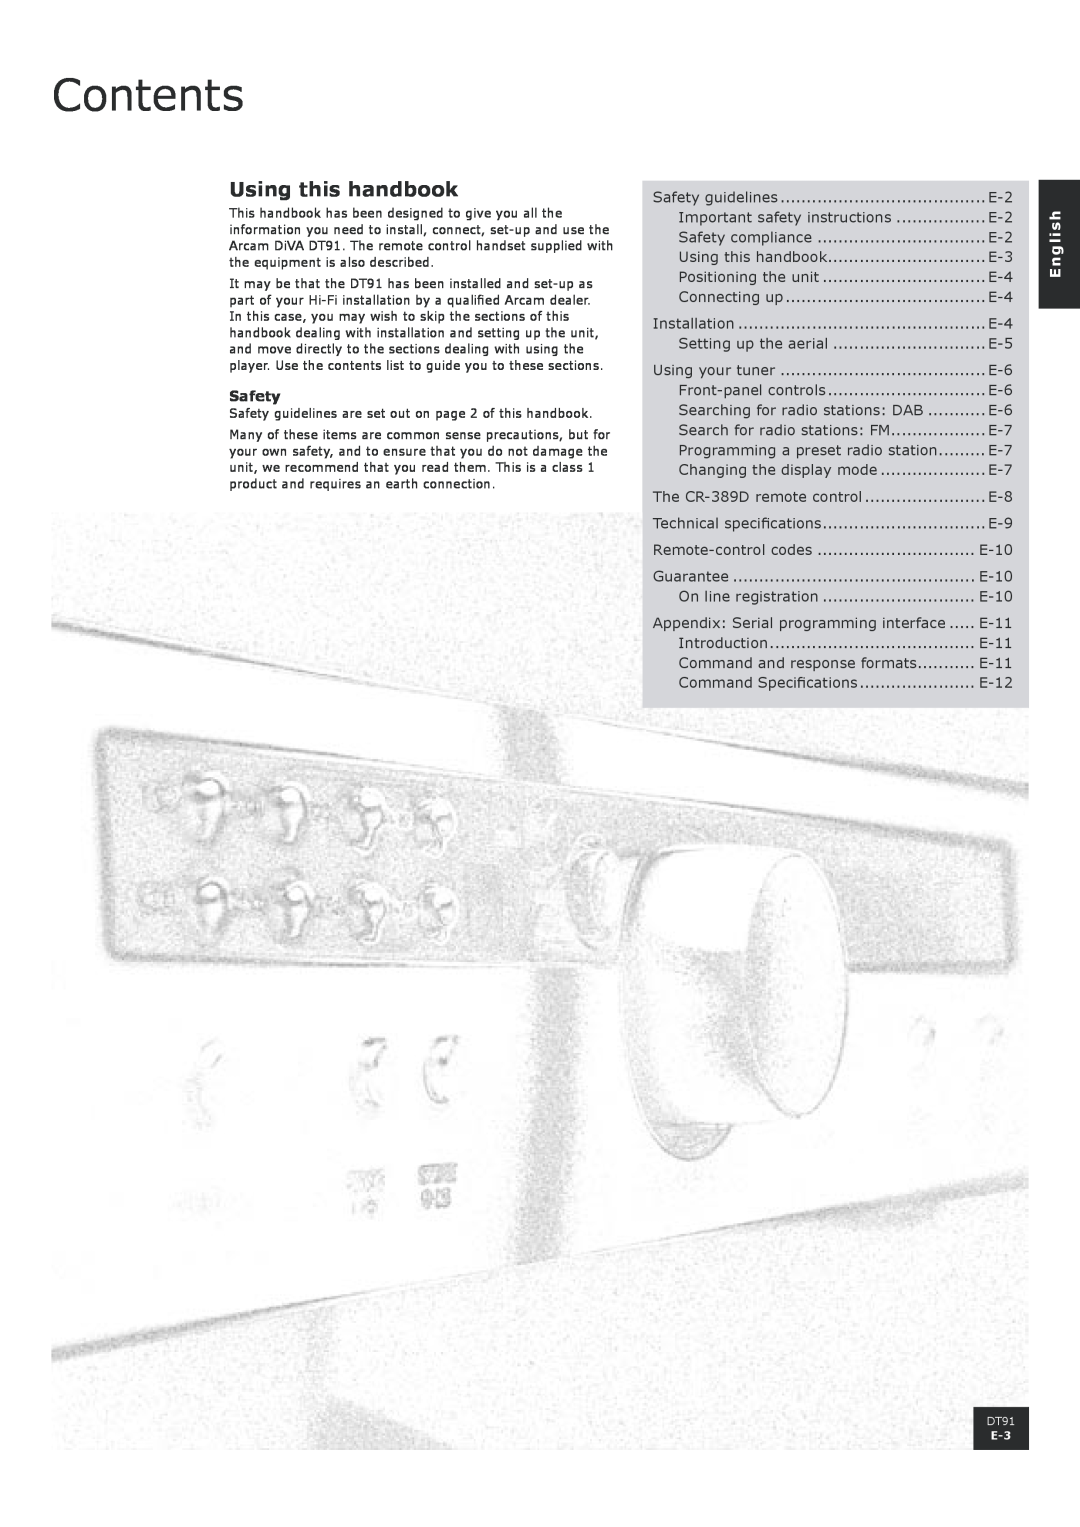 Arcam DT91 manual Contents, Using this handbook, Safety, English 